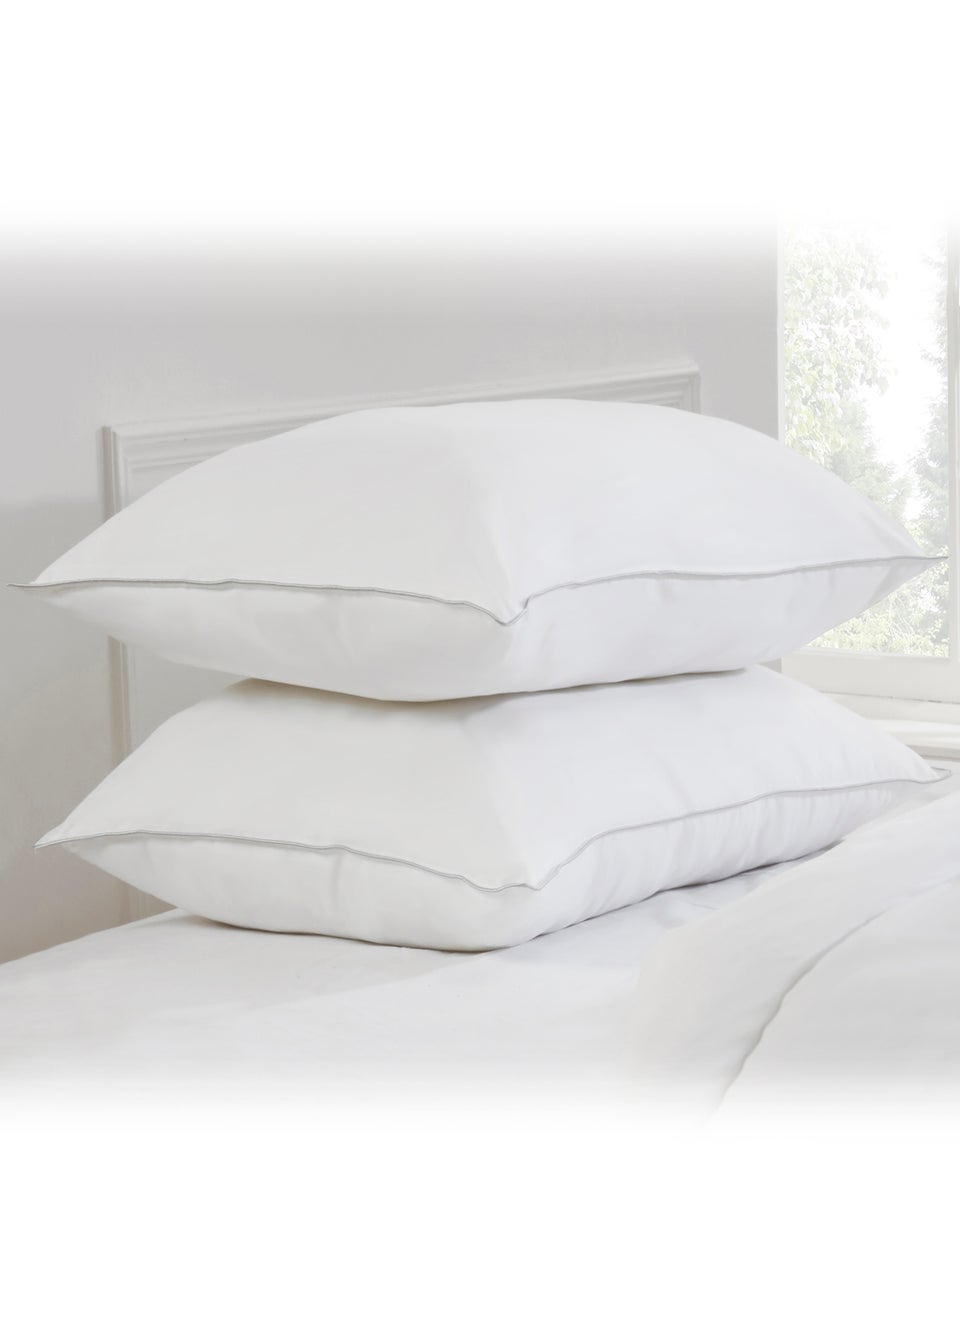 BHS Pair Luxury Overfilled Duck Feather Pillows